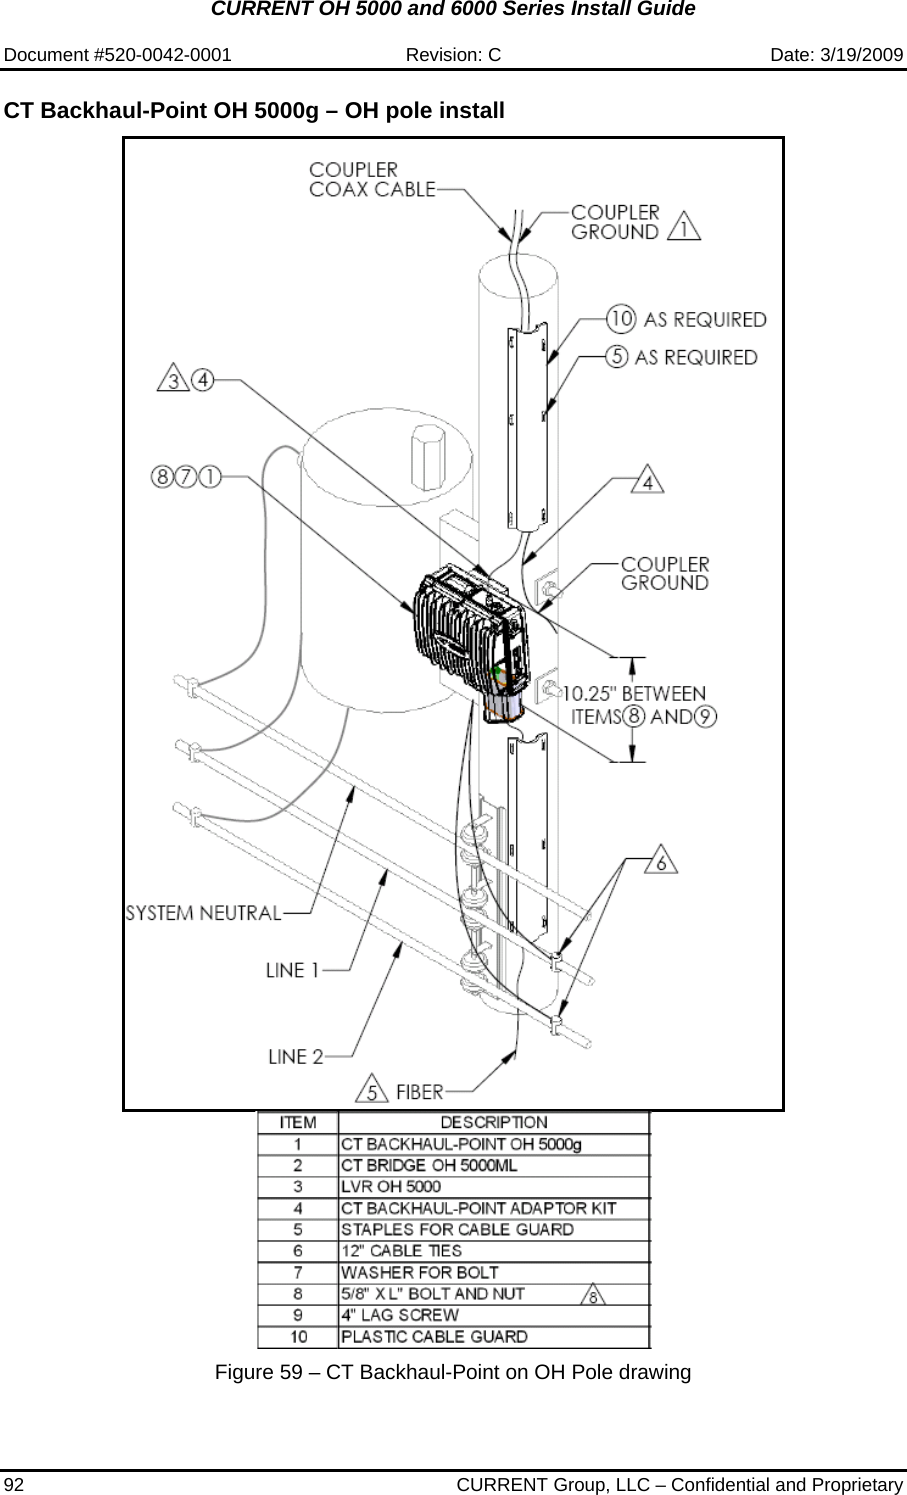 CURRENT OH 5000 and 6000 Series Install Guide  Document #520-0042-0001  Revision: C  Date: 3/19/2009 92  CURRENT Group, LLC – Confidential and Proprietary  CT Backhaul-Point OH 5000g – OH pole install     Figure 59 – CT Backhaul-Point on OH Pole drawing 